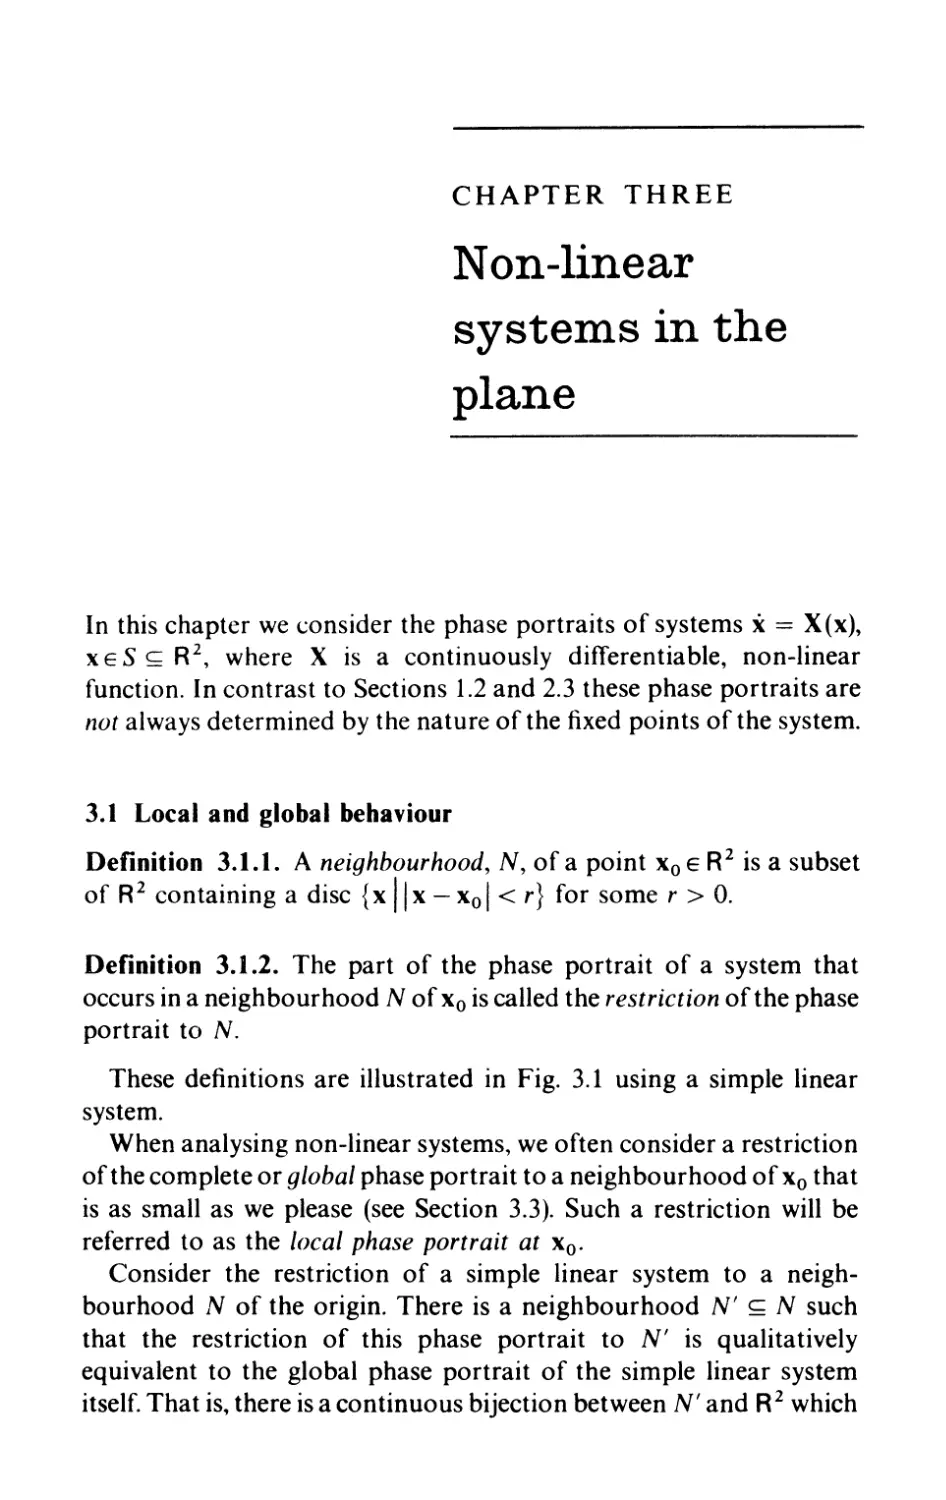 3 Non-Iinear systems in the plane